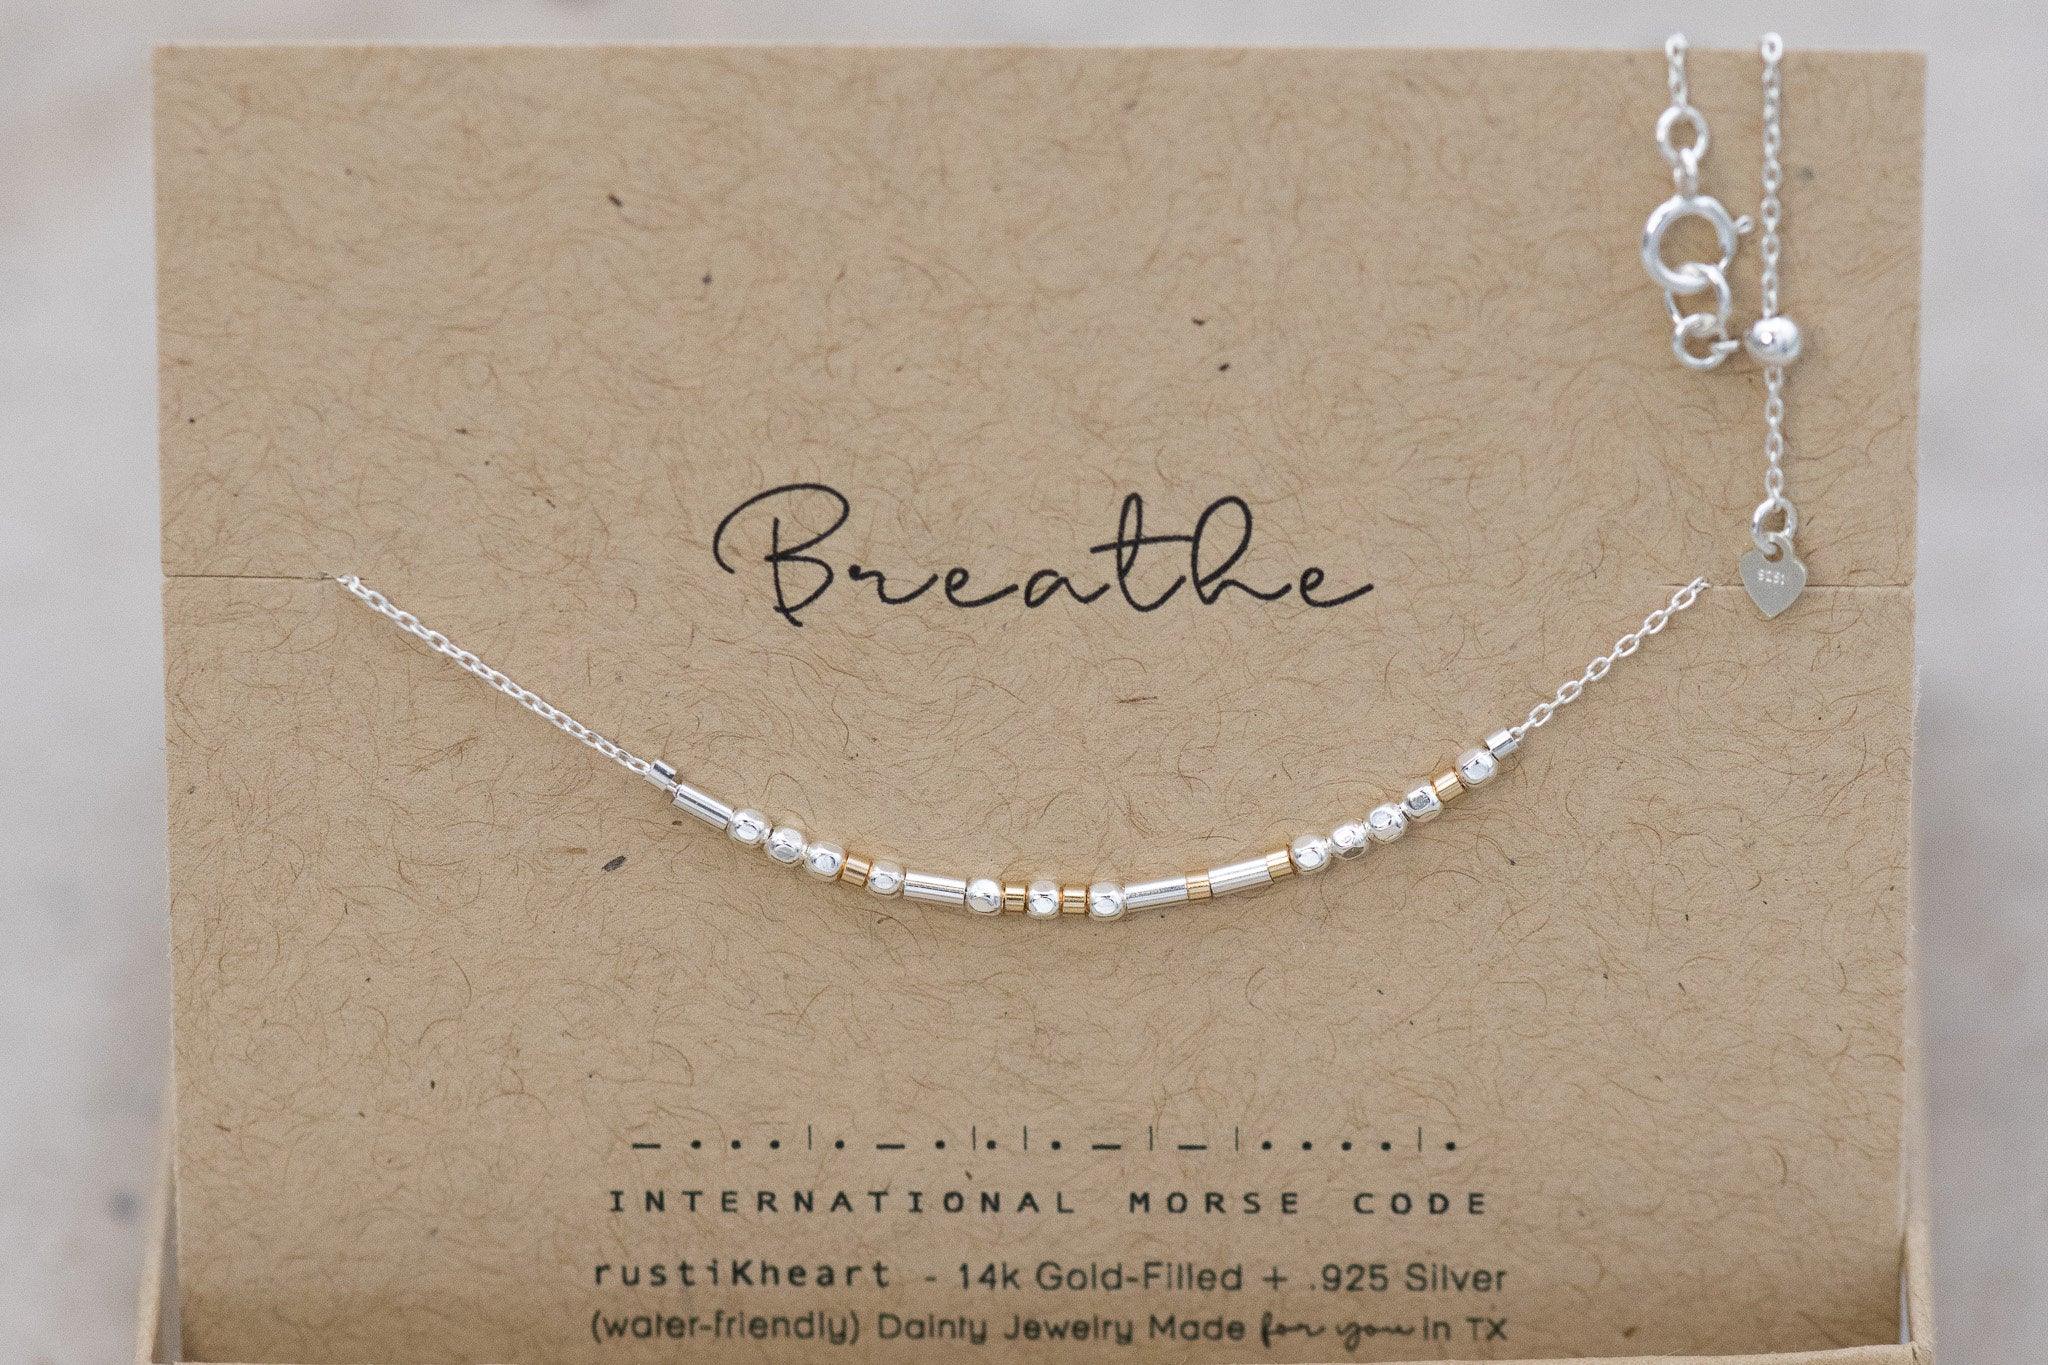 Custom Morse Code Silver Necklace - Personalized Gift Morse Code Jewelry Breathe Necklace Remember to Breathe Yoga Relax Yogi Gift - Morse and Dainty